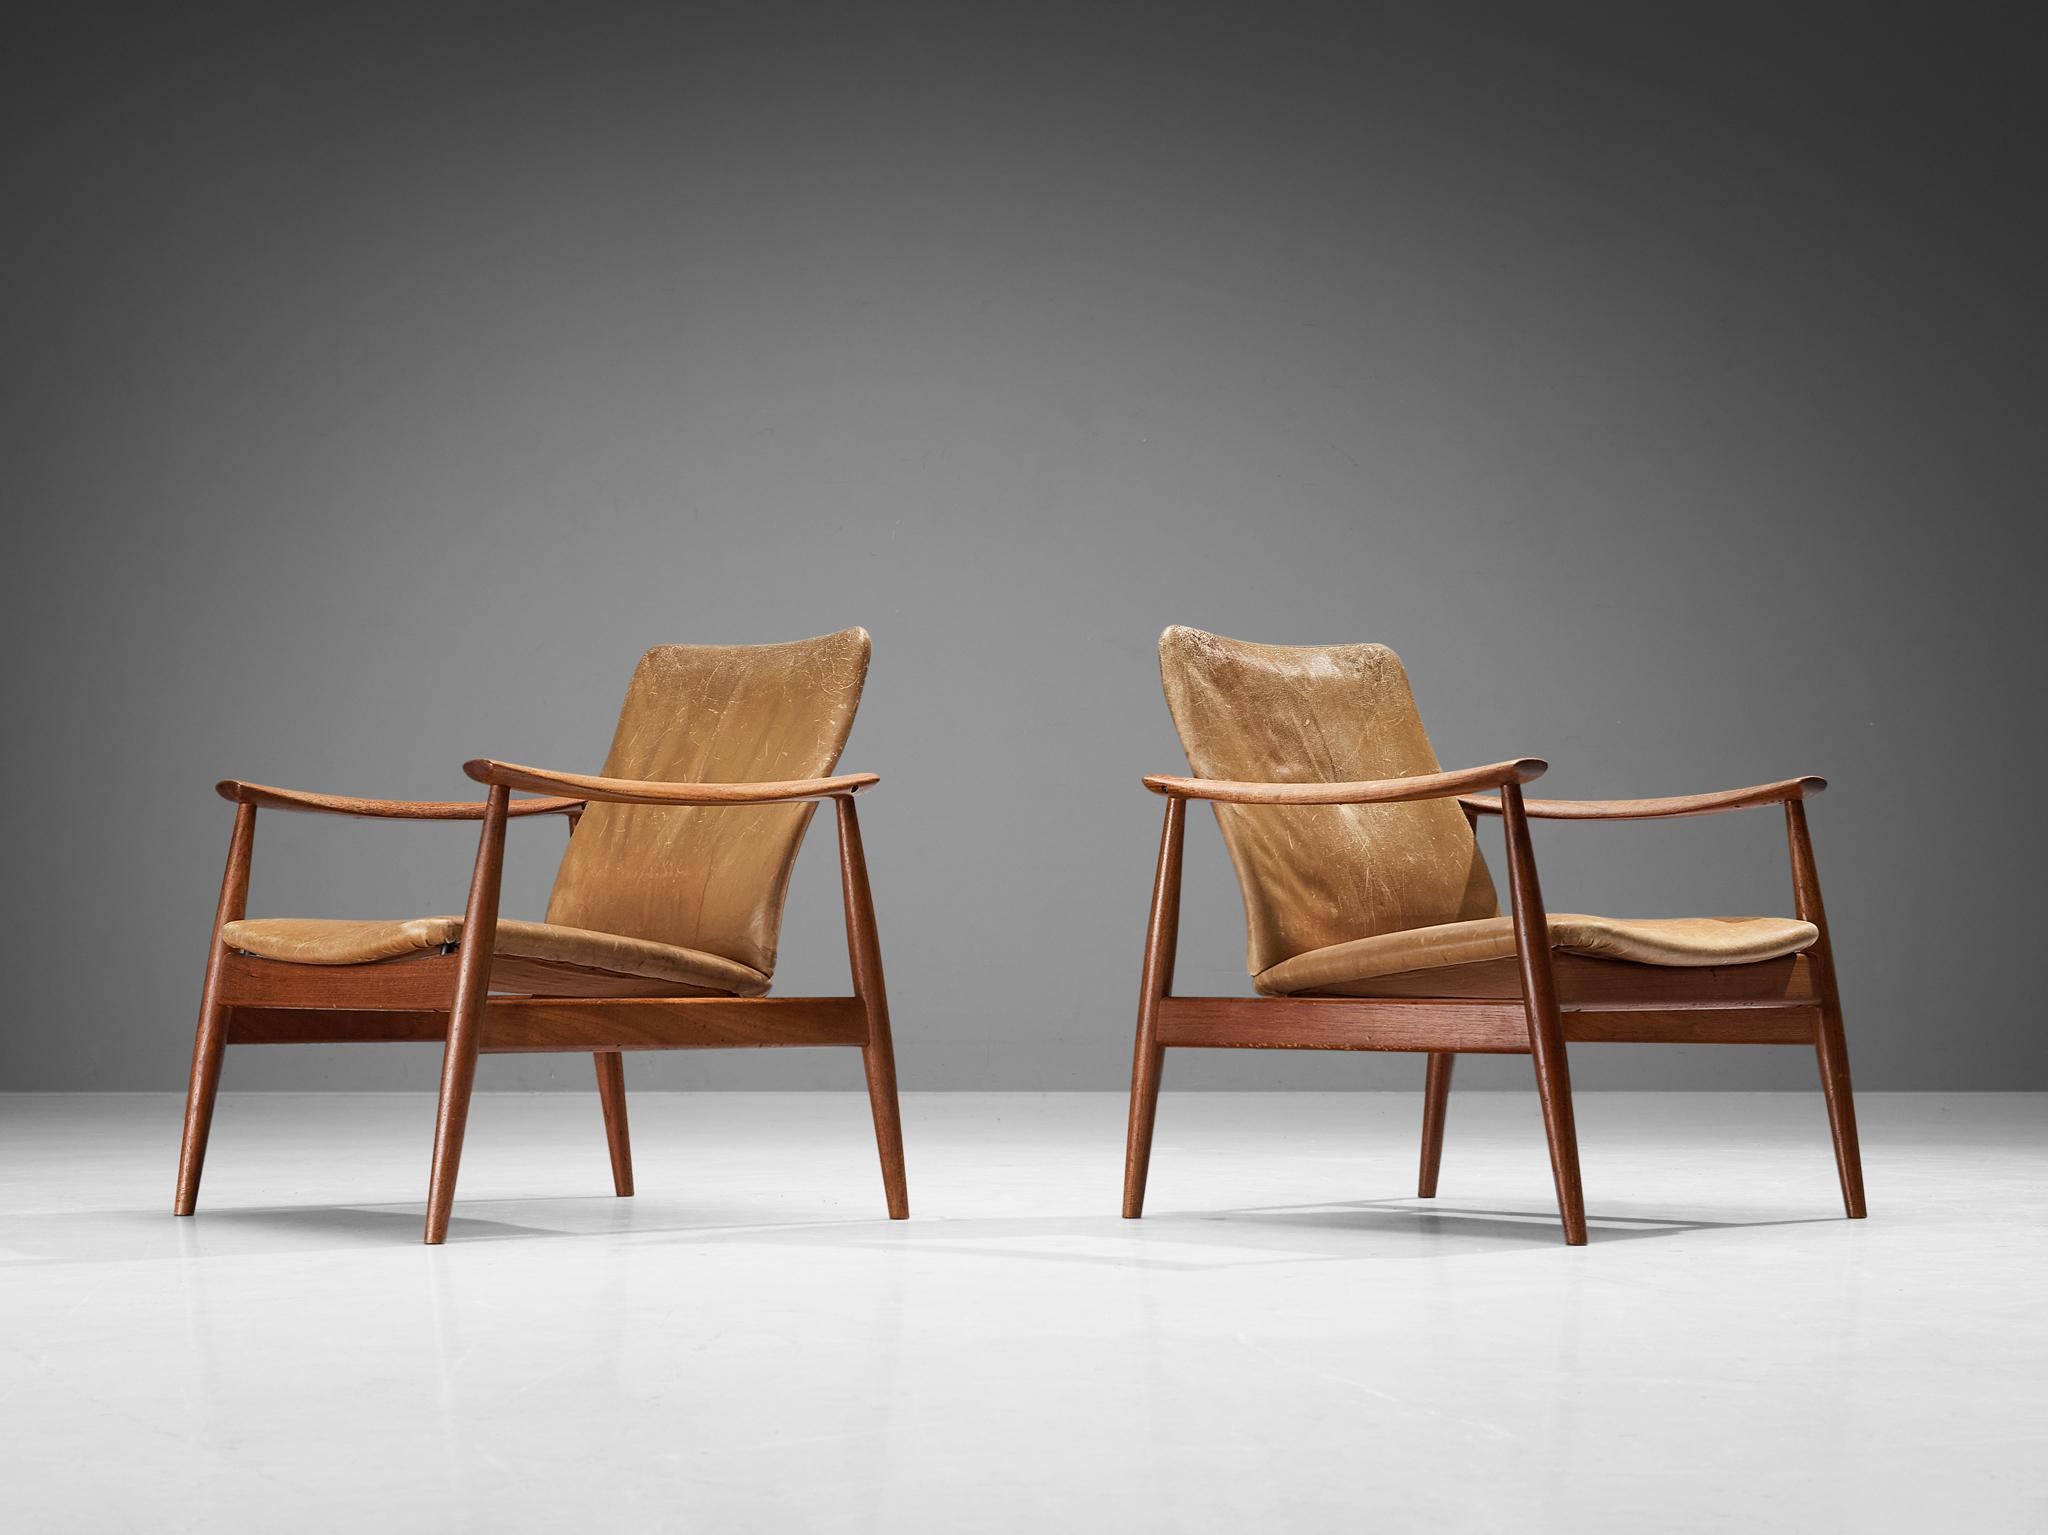 Mid-20th Century Finn Juhl for France & Søn Pair of Lounge Chairs in Teak and Leather 